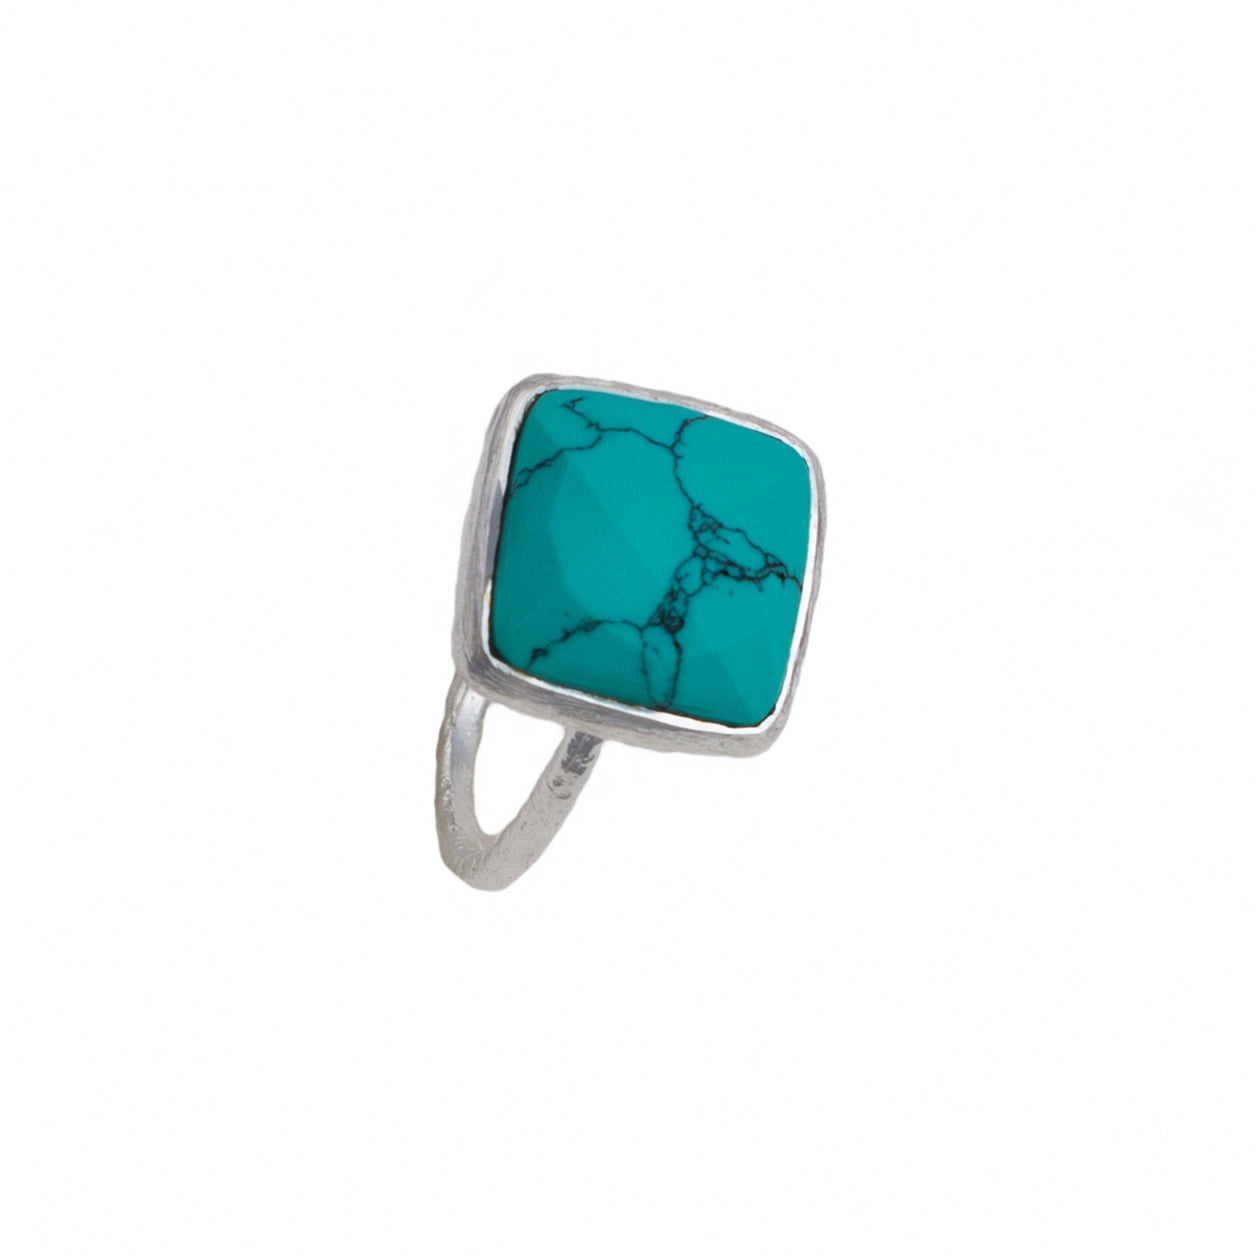 Silver Ring with Square Semiprecious Stone - Turquoise